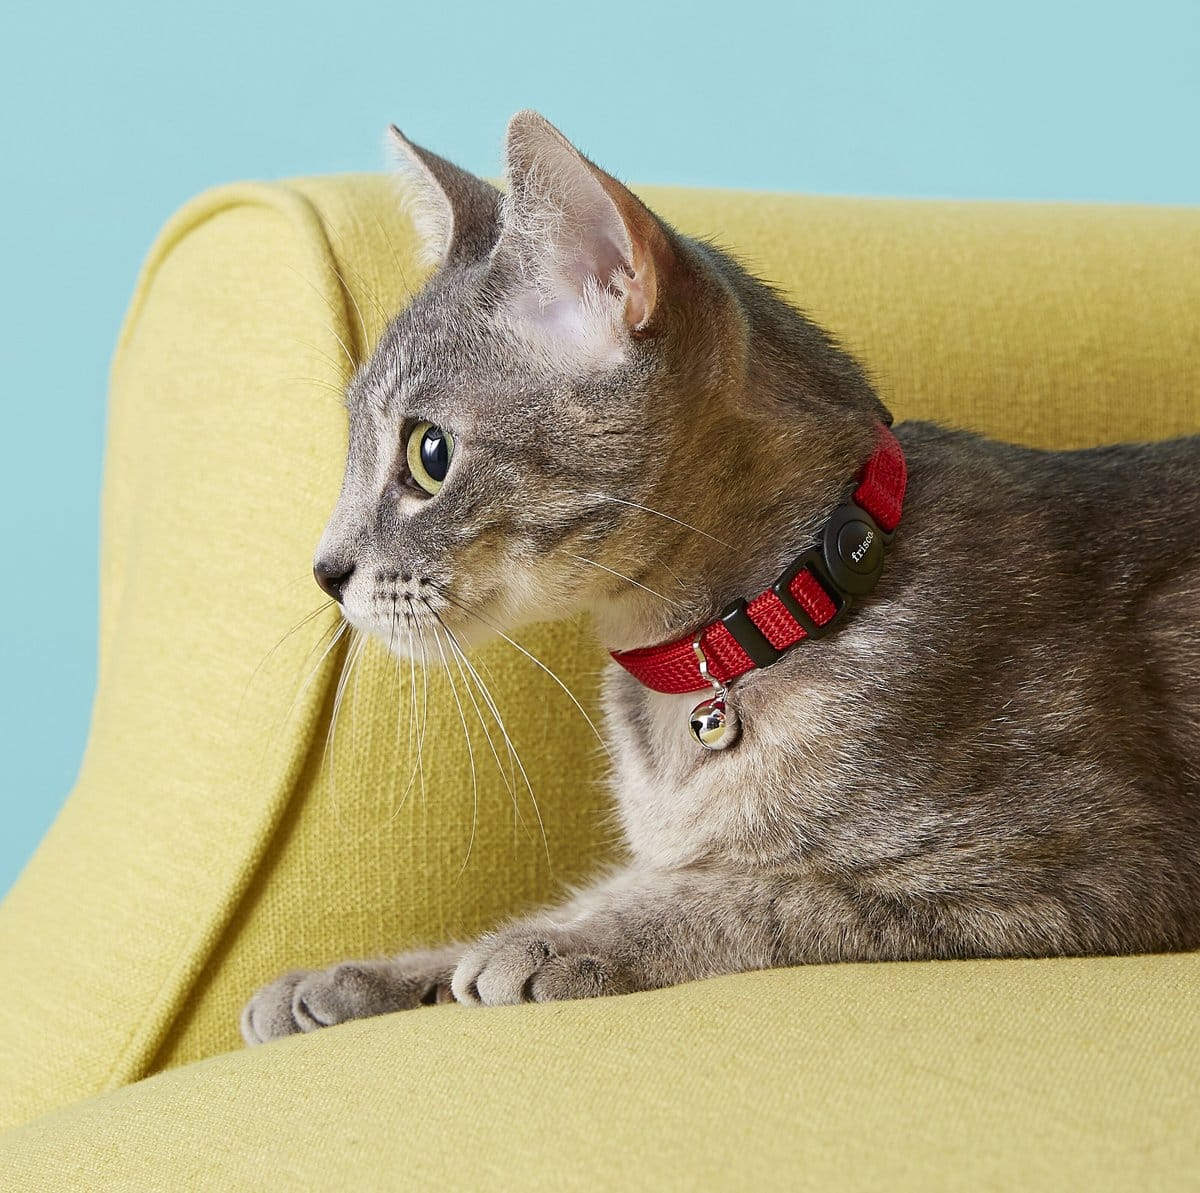 tabby cat wearing red collar with bell